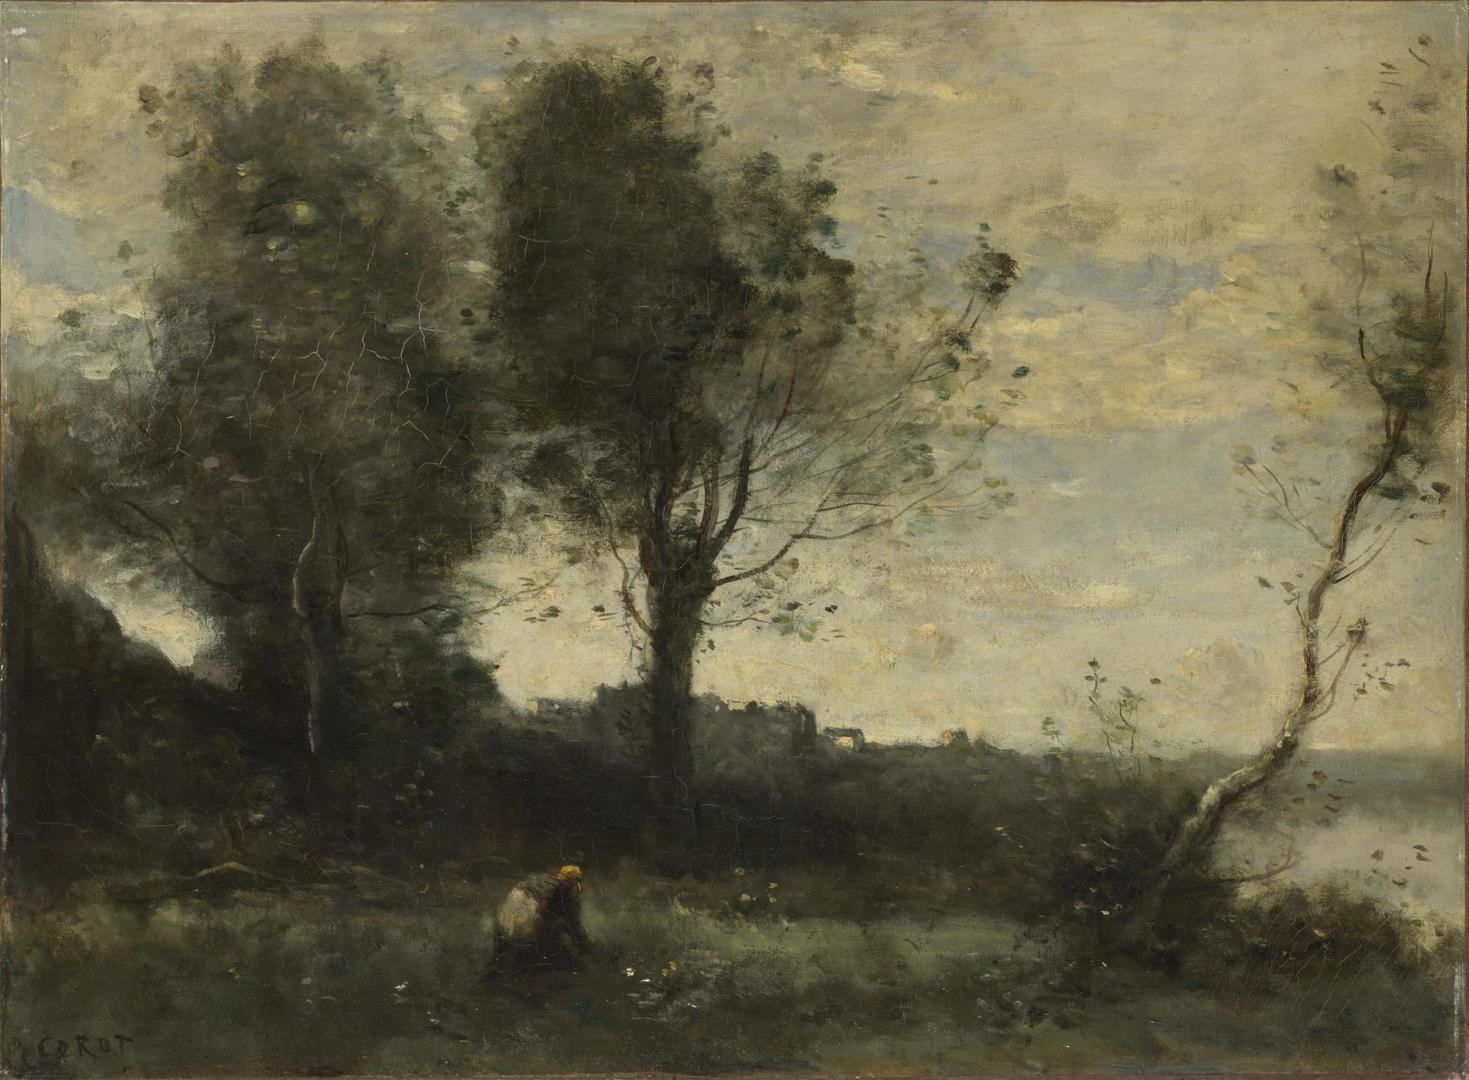 The Wood Gatherer by Jean-Baptiste-Camille Corot